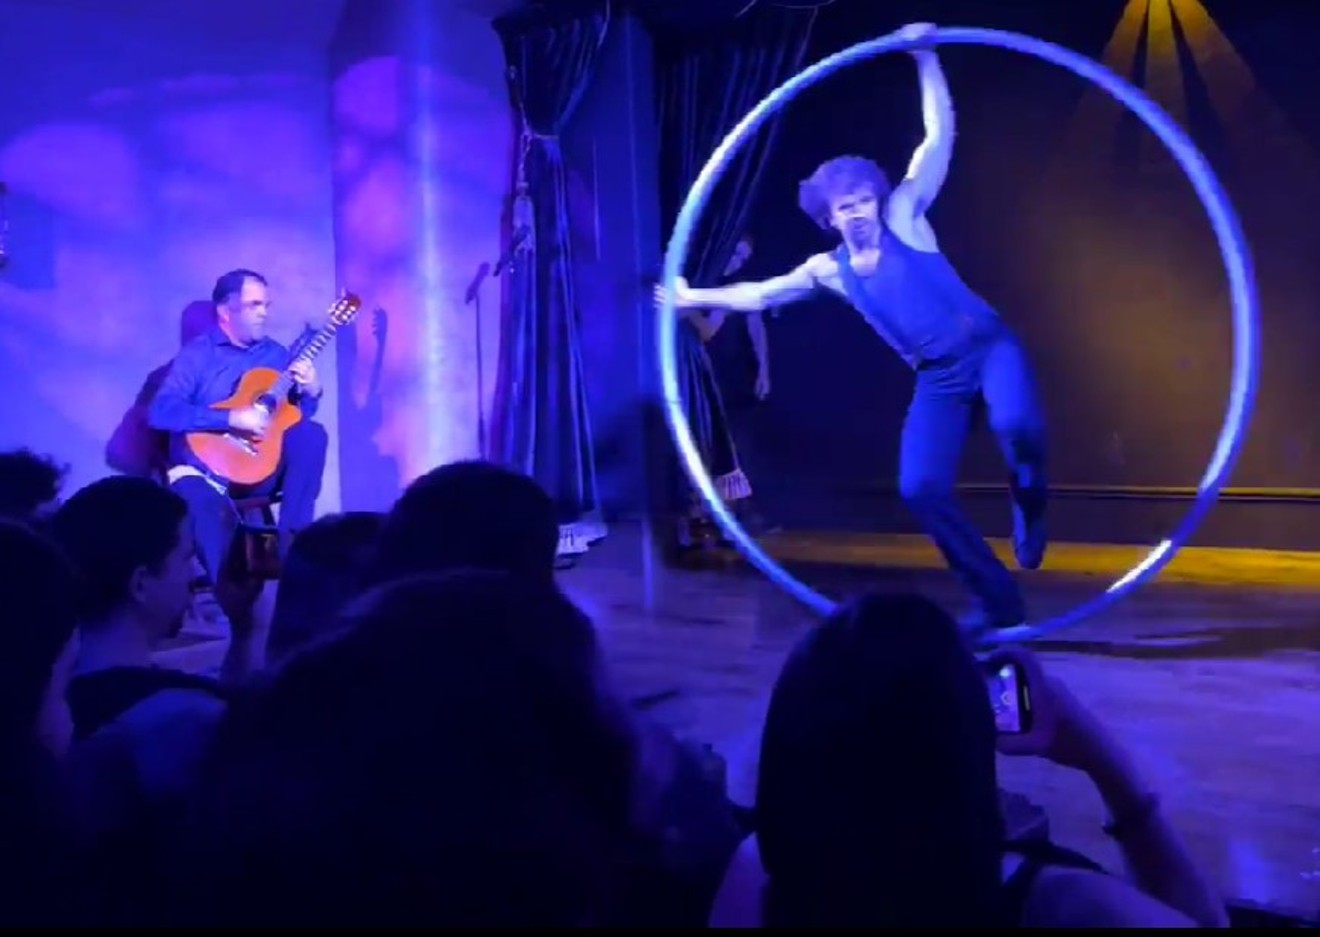 Guitarist Tim Courtney improvises a soundtrack to the movements of David Poznanter as he spins around on a metal ring.